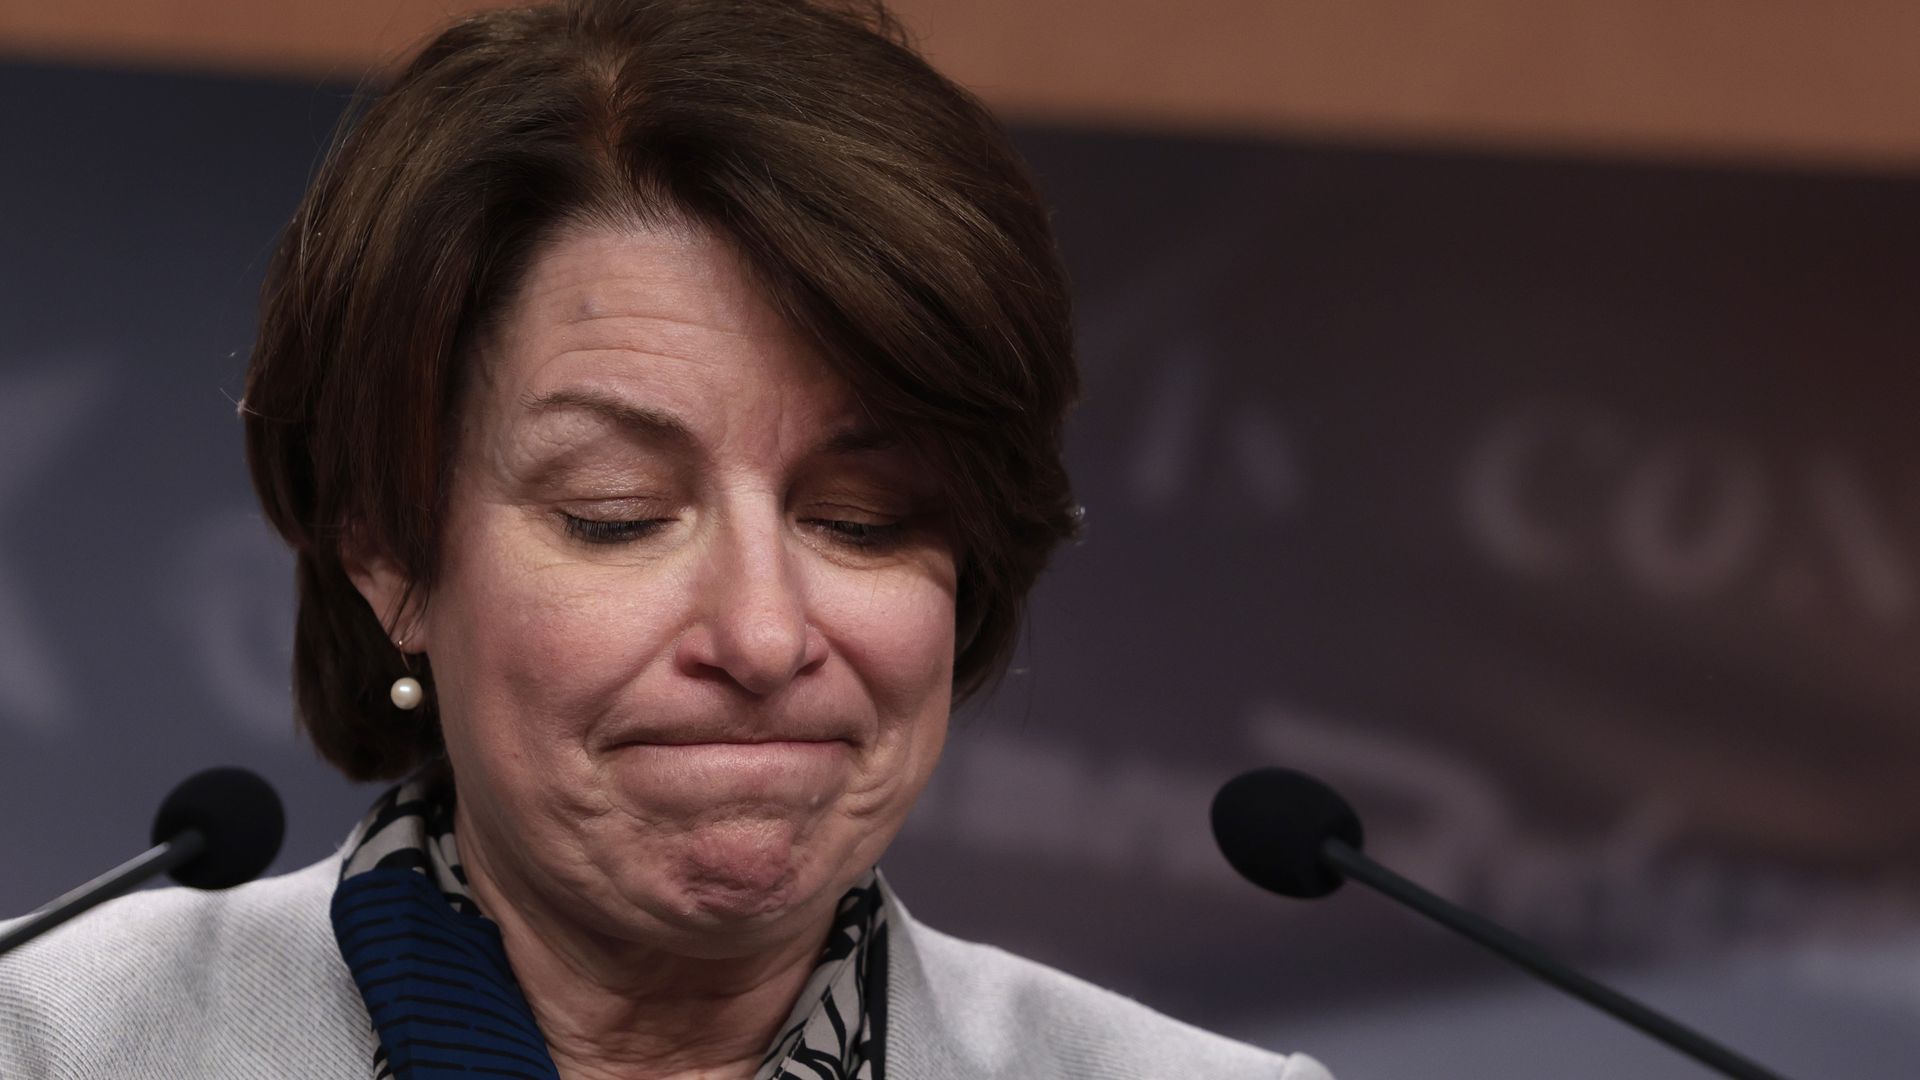 Photo of Sen. Amy Klobuchar's face with her lips pursed